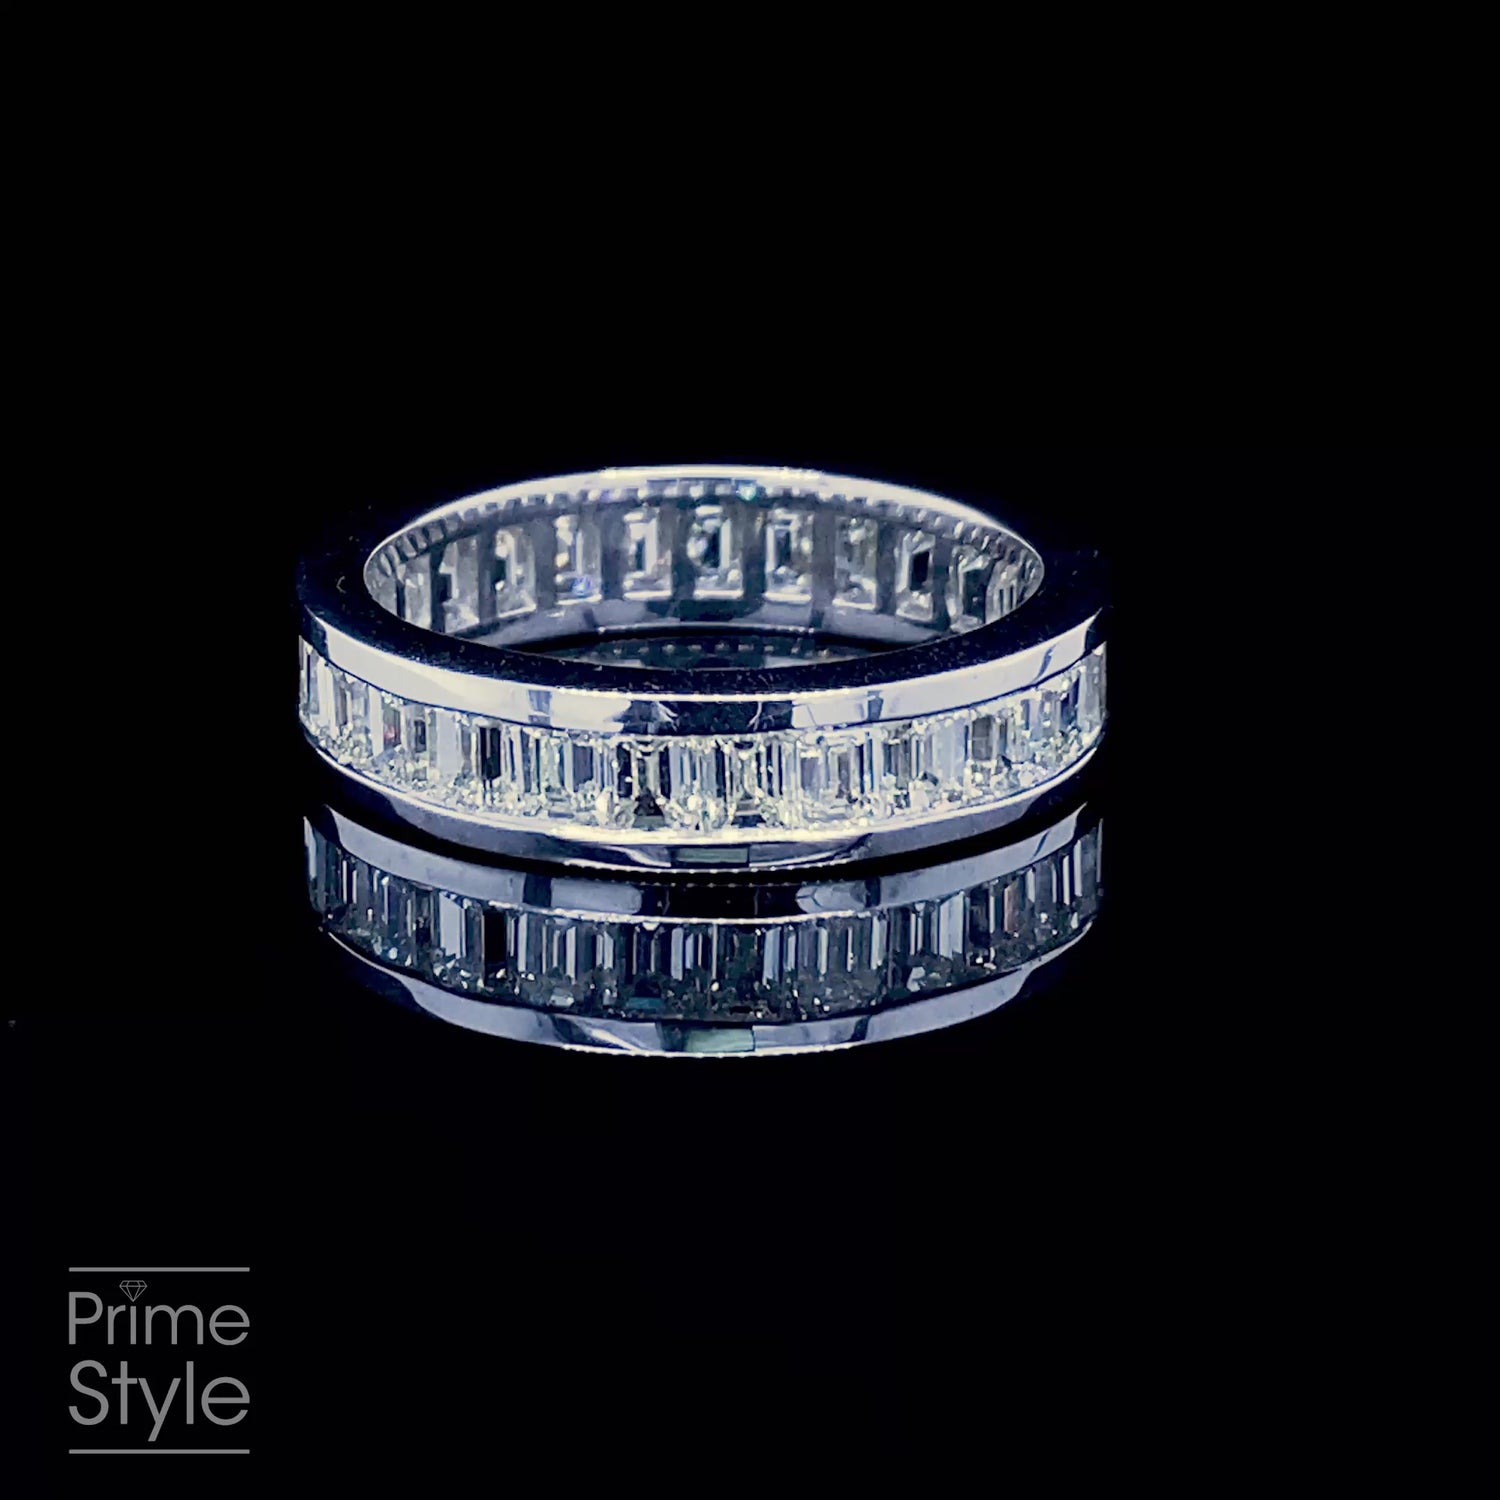 Exquisite 7.00CT Emerald Cut Diamond Eternity Ring in 14KT White Gold